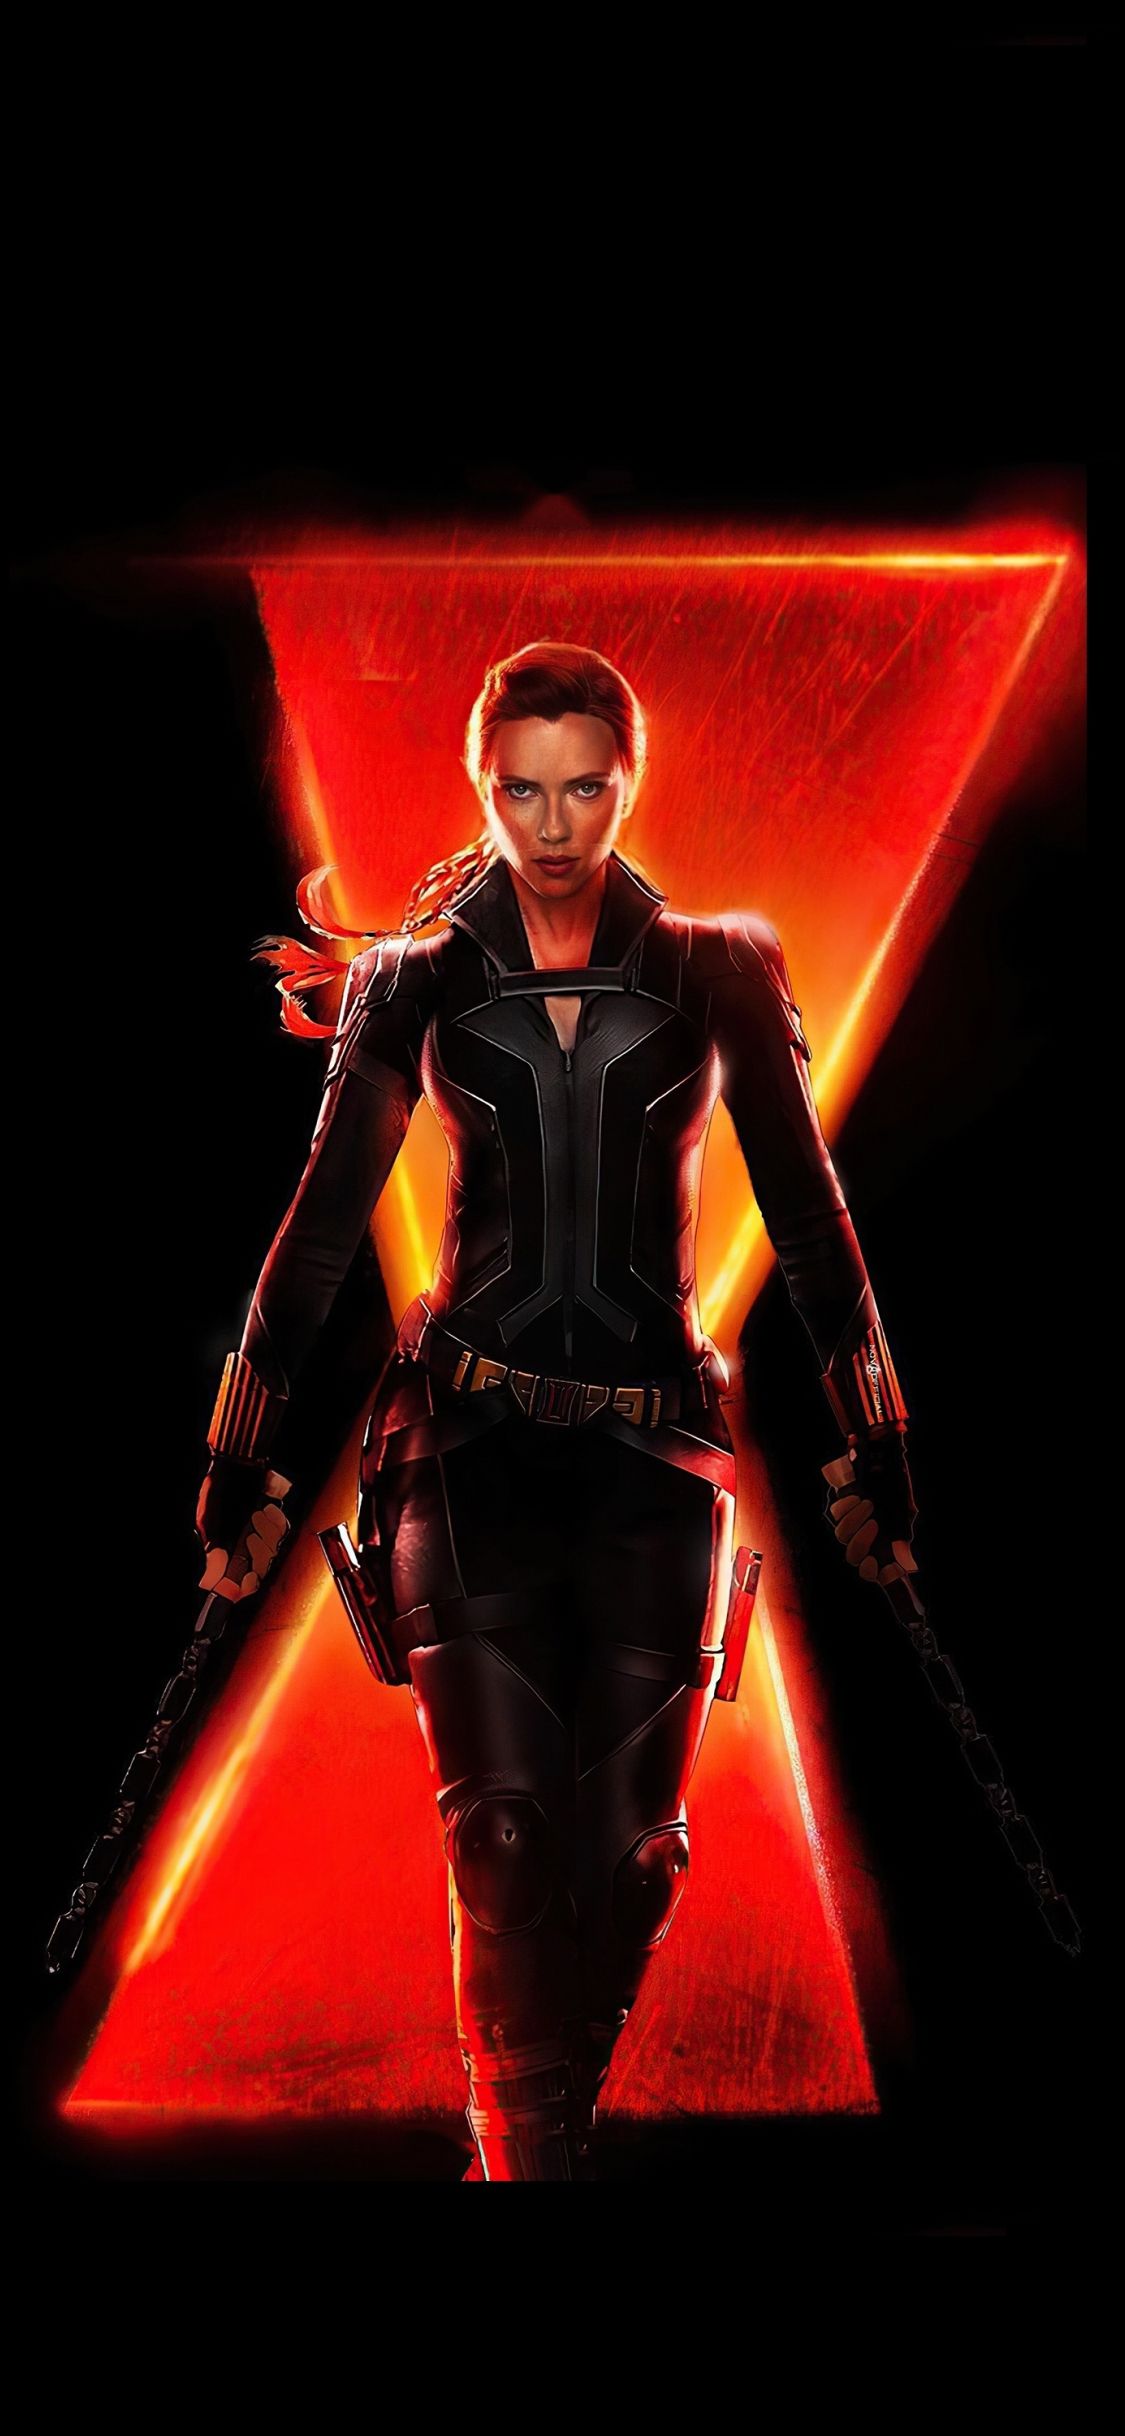 Download 1125x2436 wallpapers black widow, 2020 movie, poster, marvel studio movie, iphone x 1125x2436 hd image, background, 24996